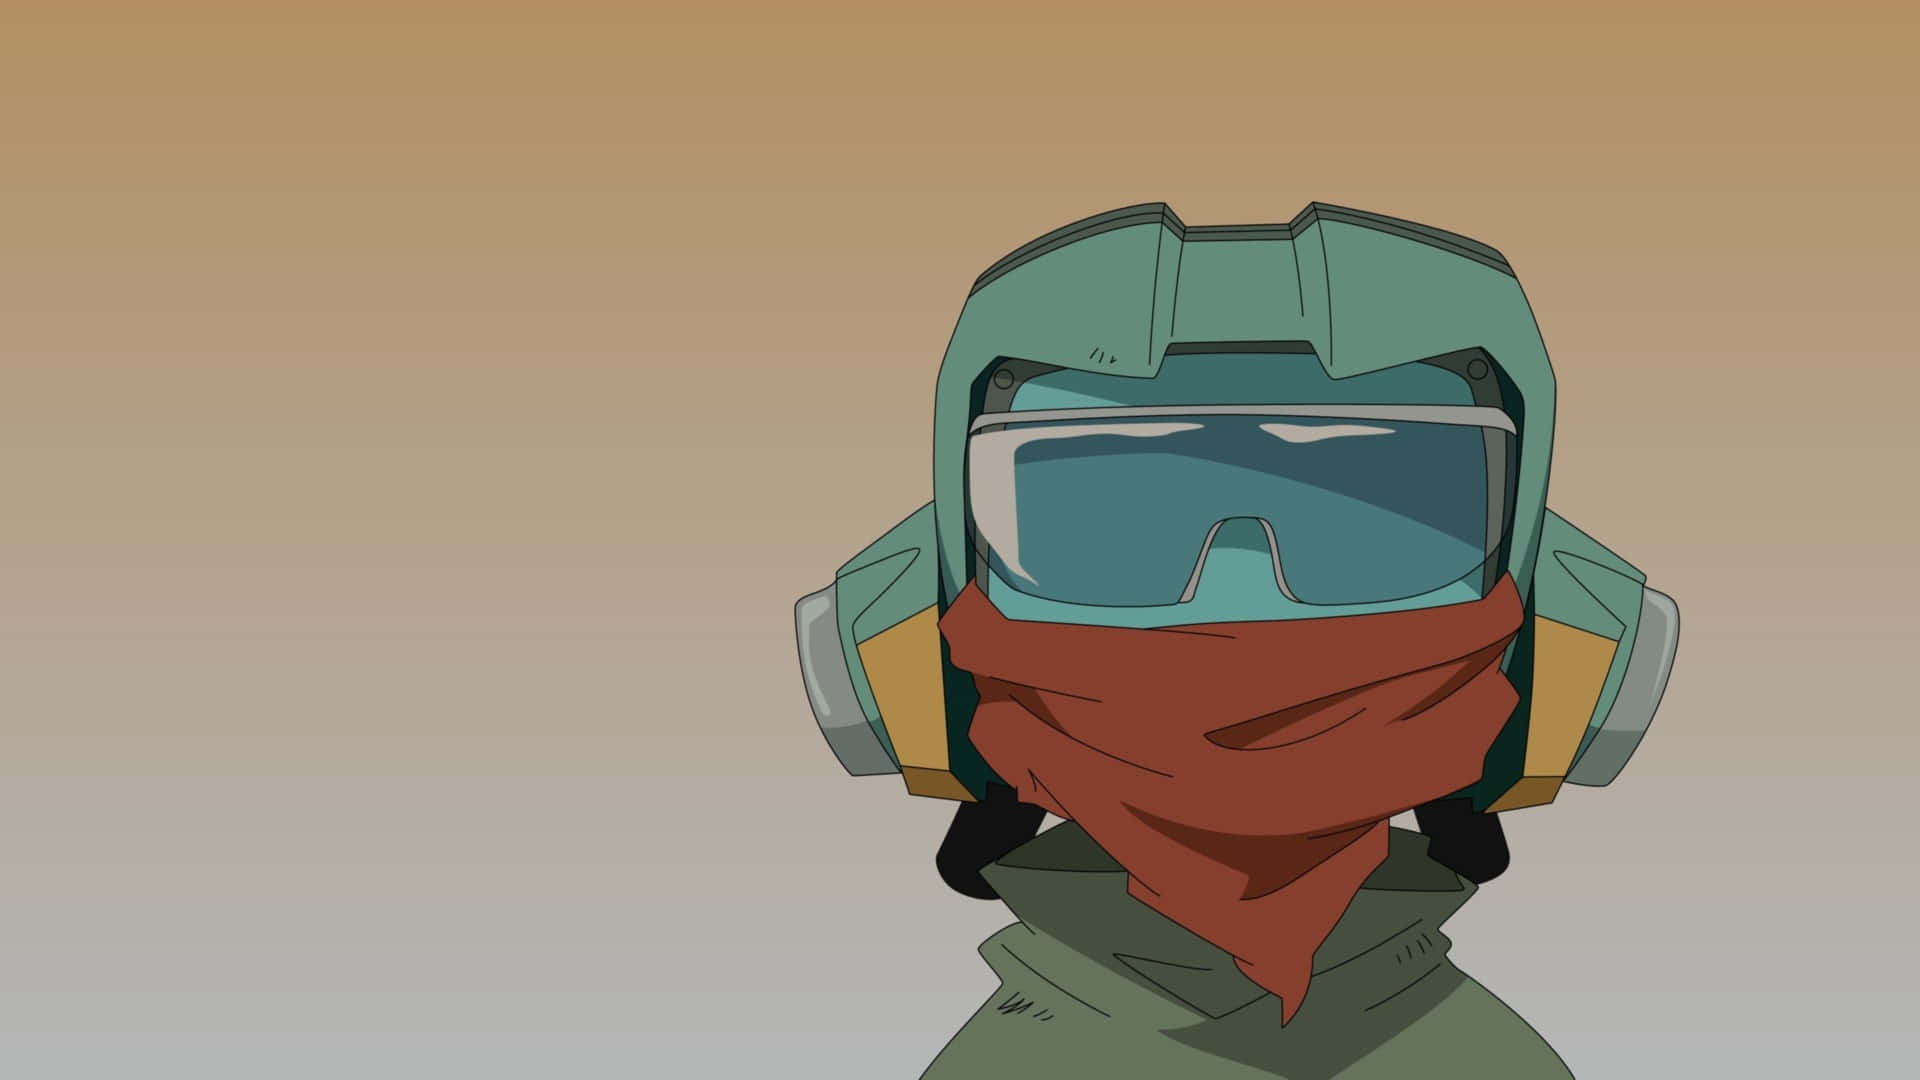 Canti, the iconic robot from FLCL anime series, posing against a blue background. Wallpaper